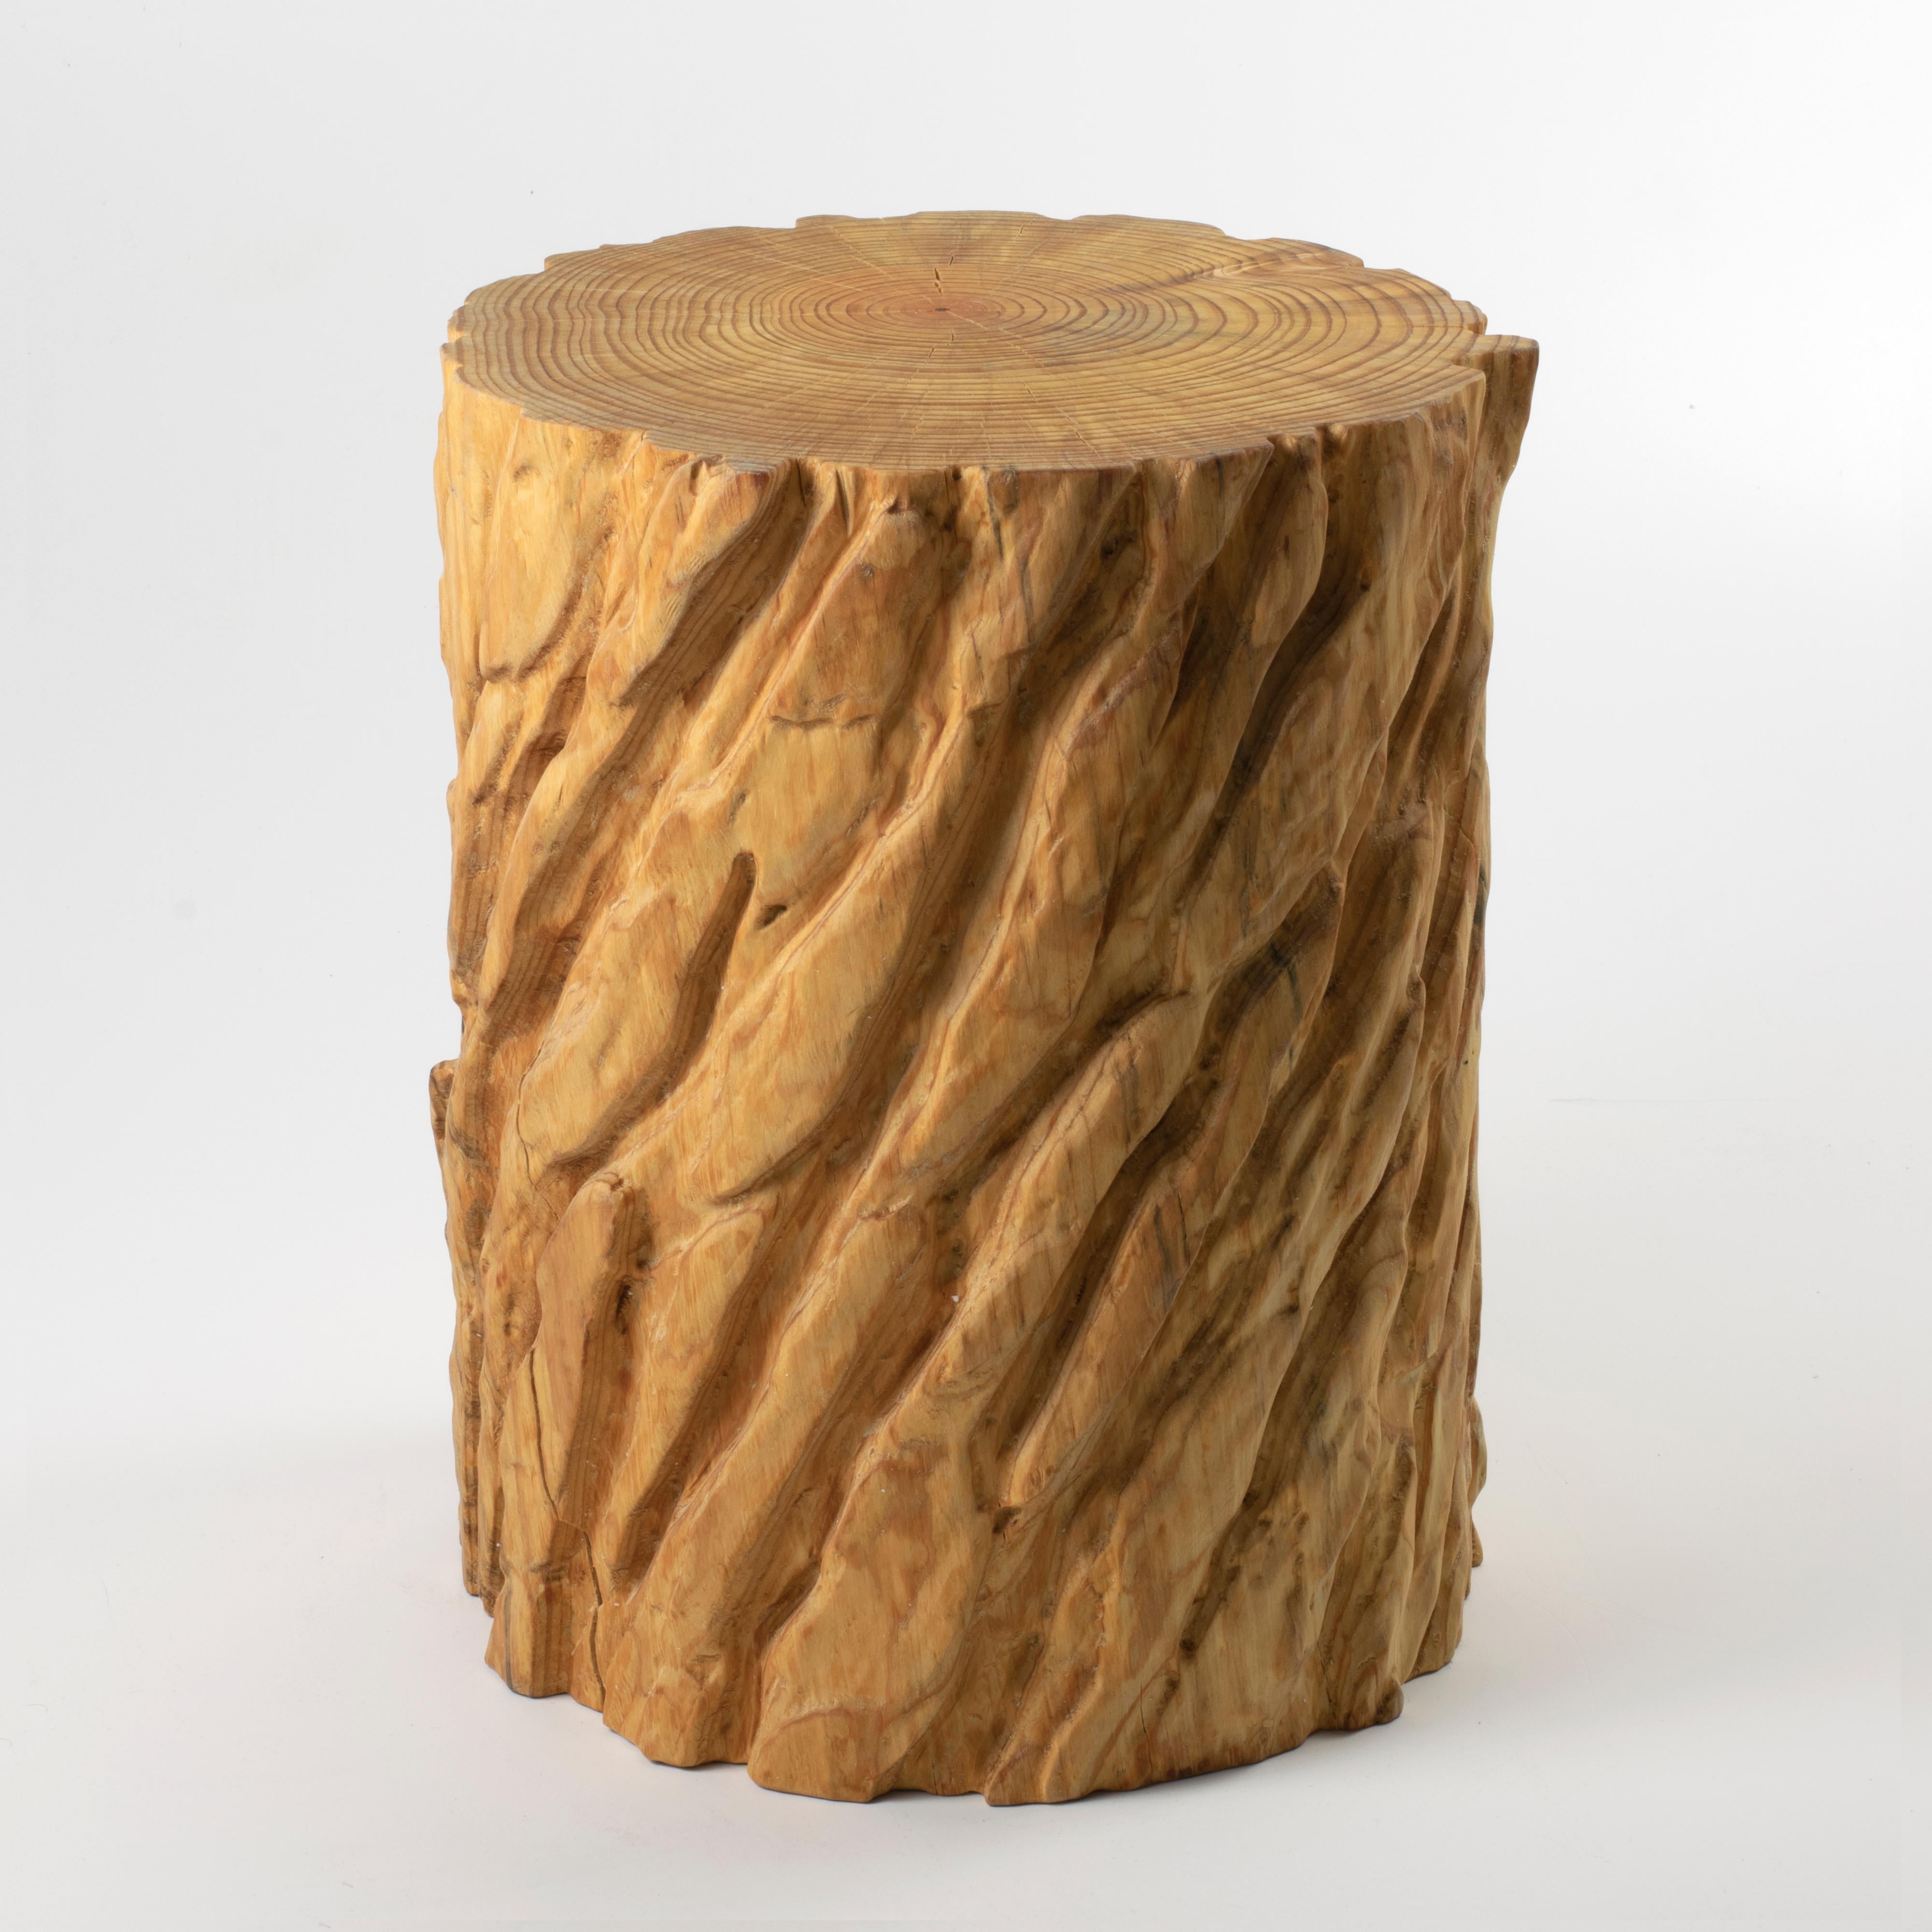 American Bark Map Stool, Set of 3 by Timbur, Represented by Tuleste Factory For Sale